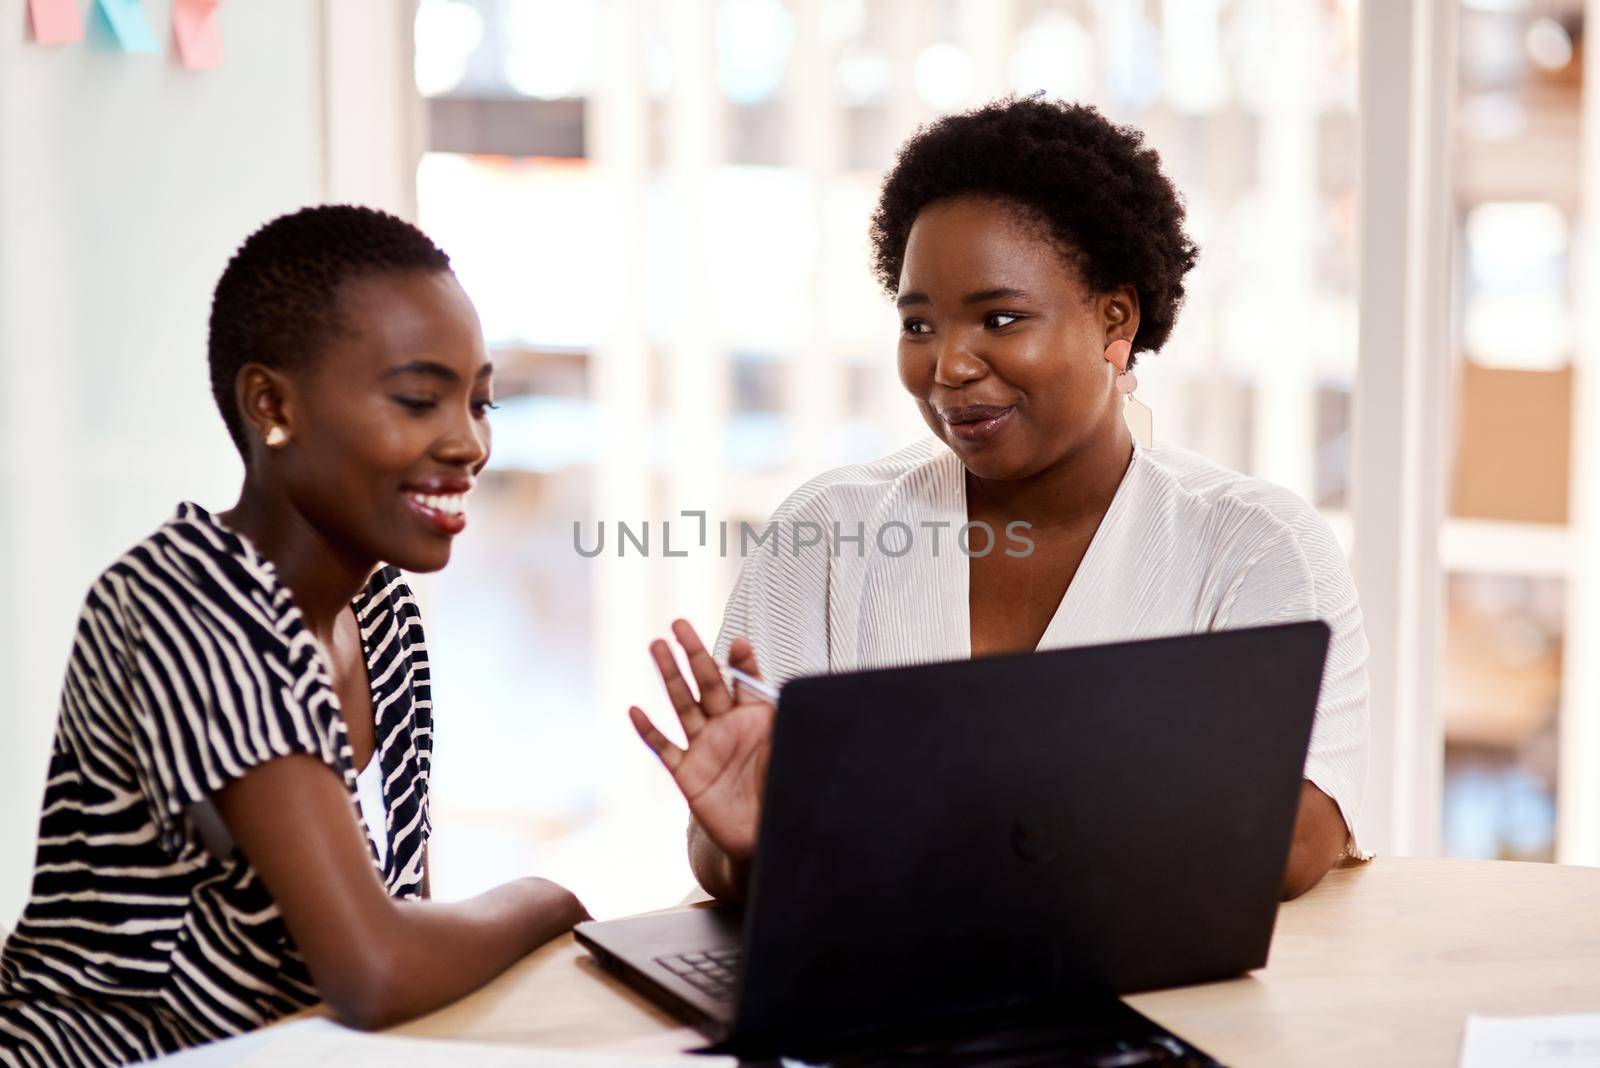 Their latest invention is sure to make waves. two businesswomen working together on a laptop in an office